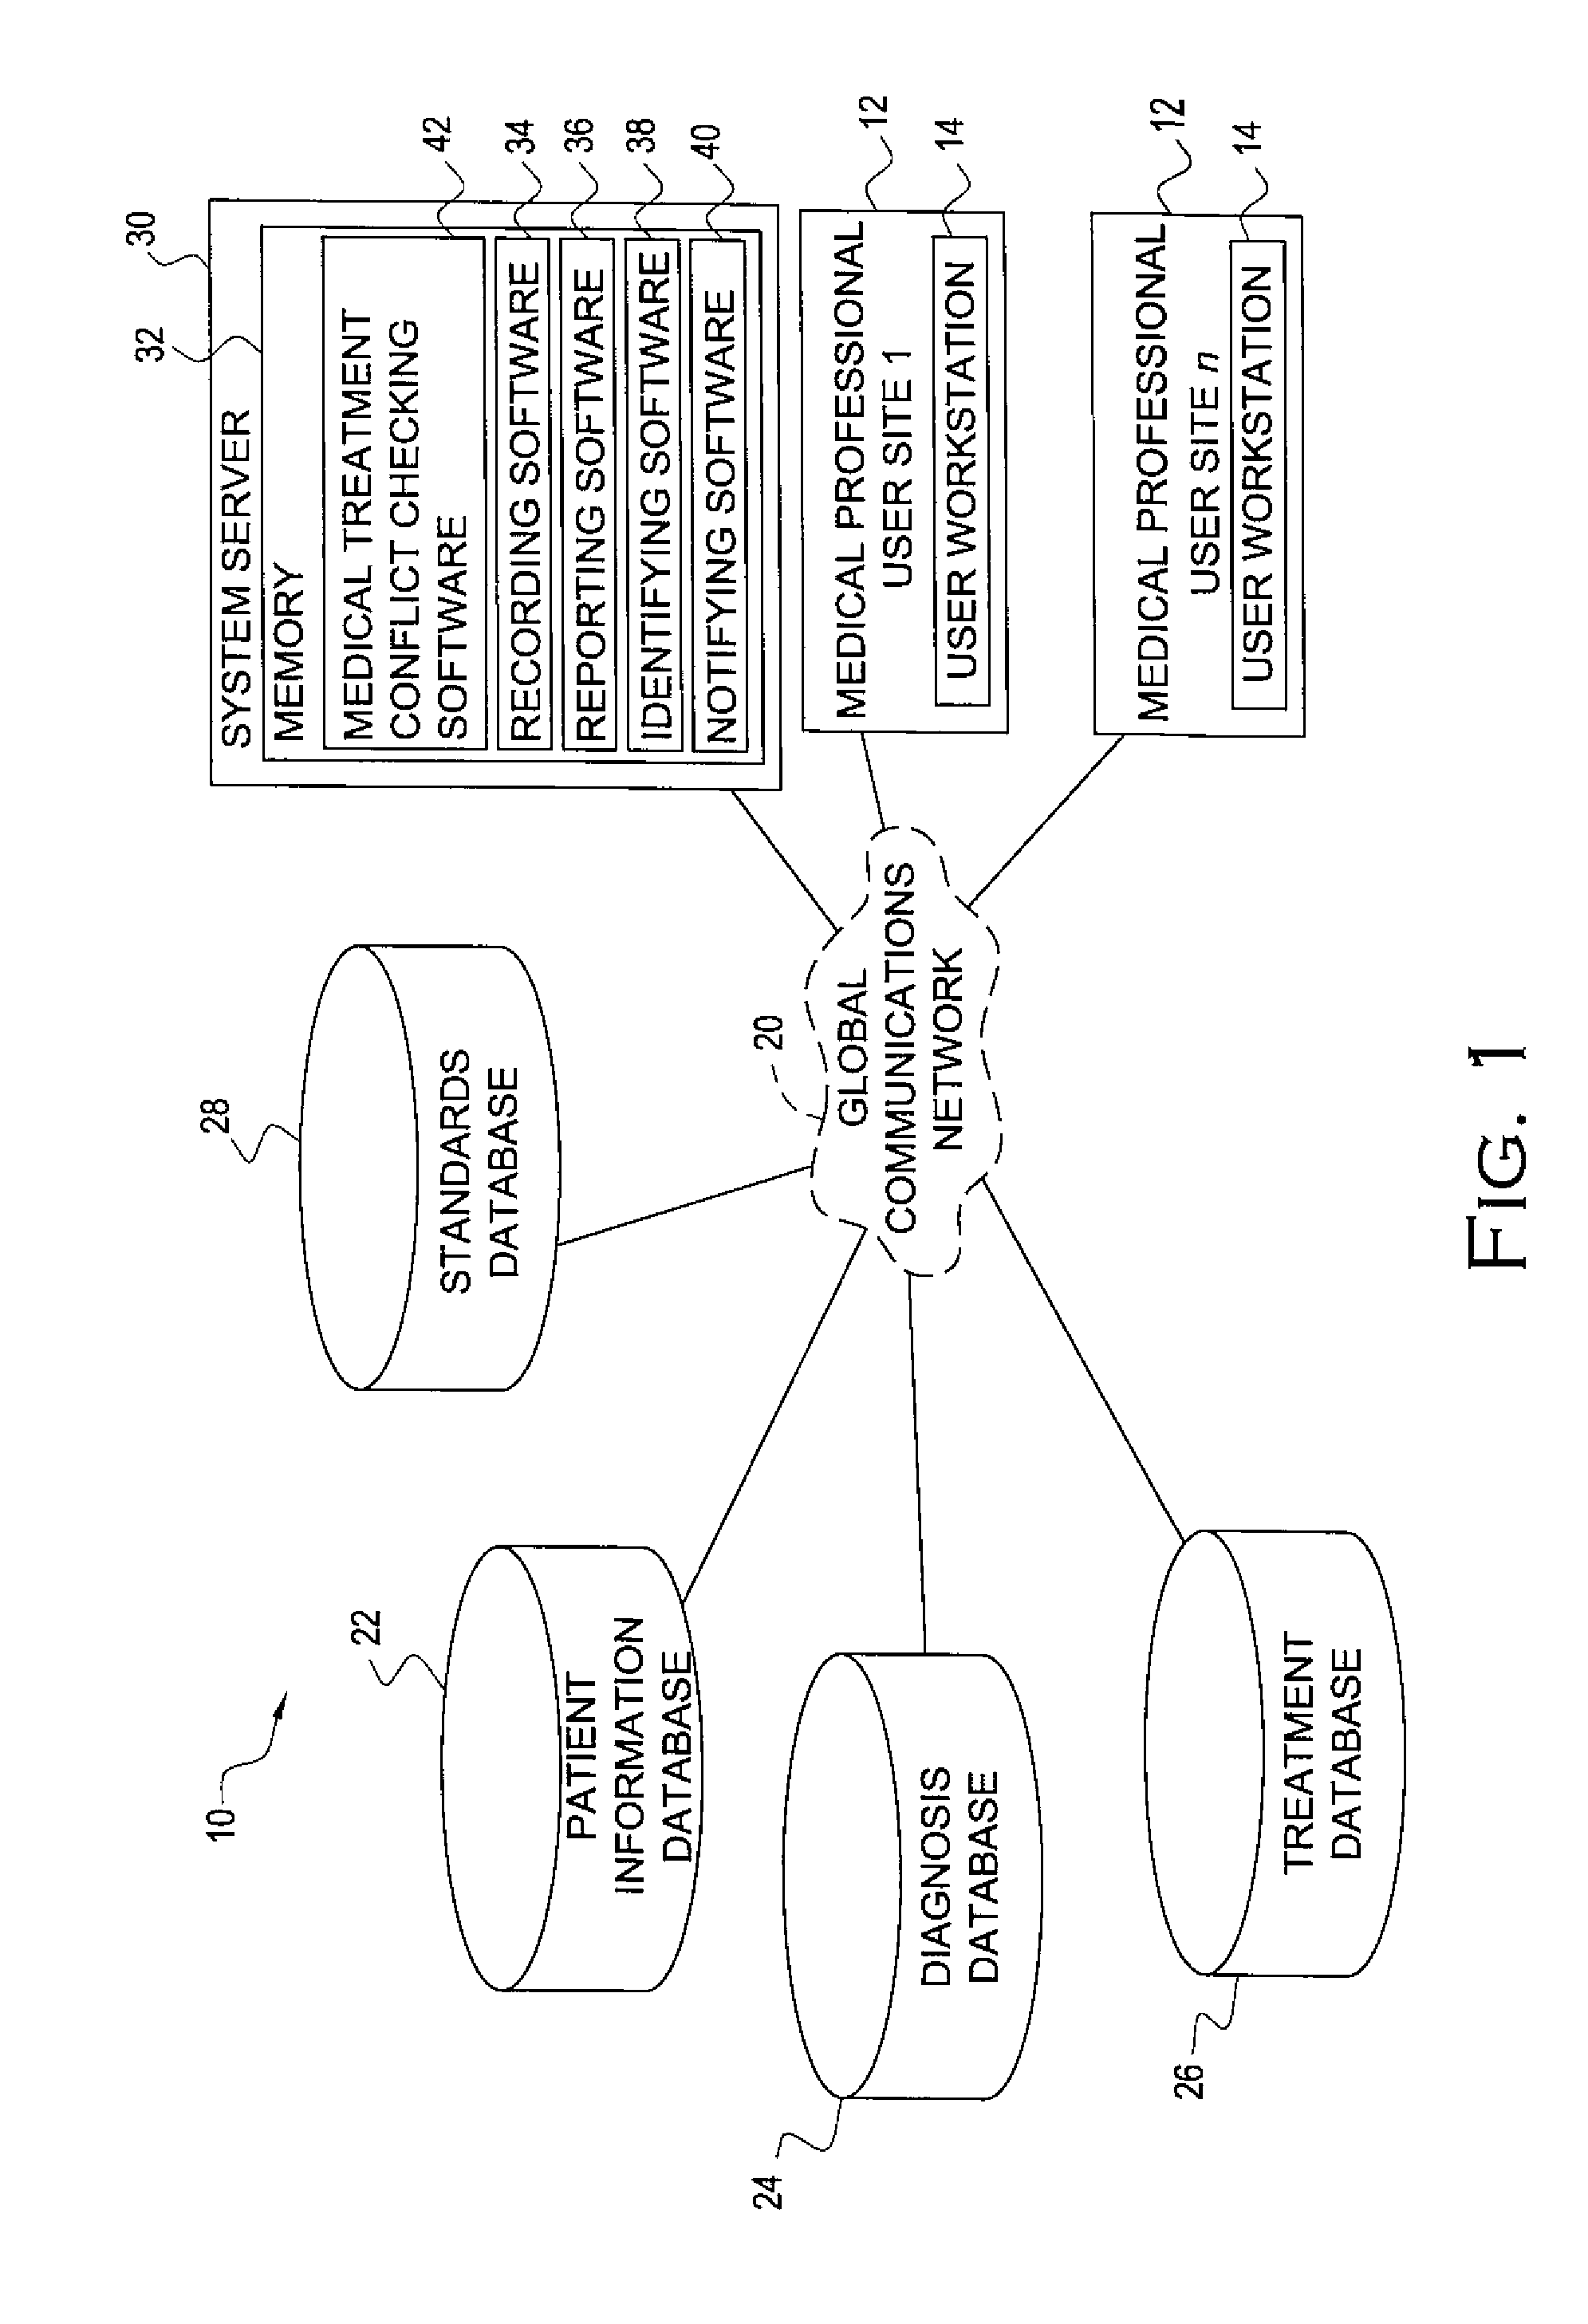 Medical decision system including question mapping and cross referencing system and associated methods